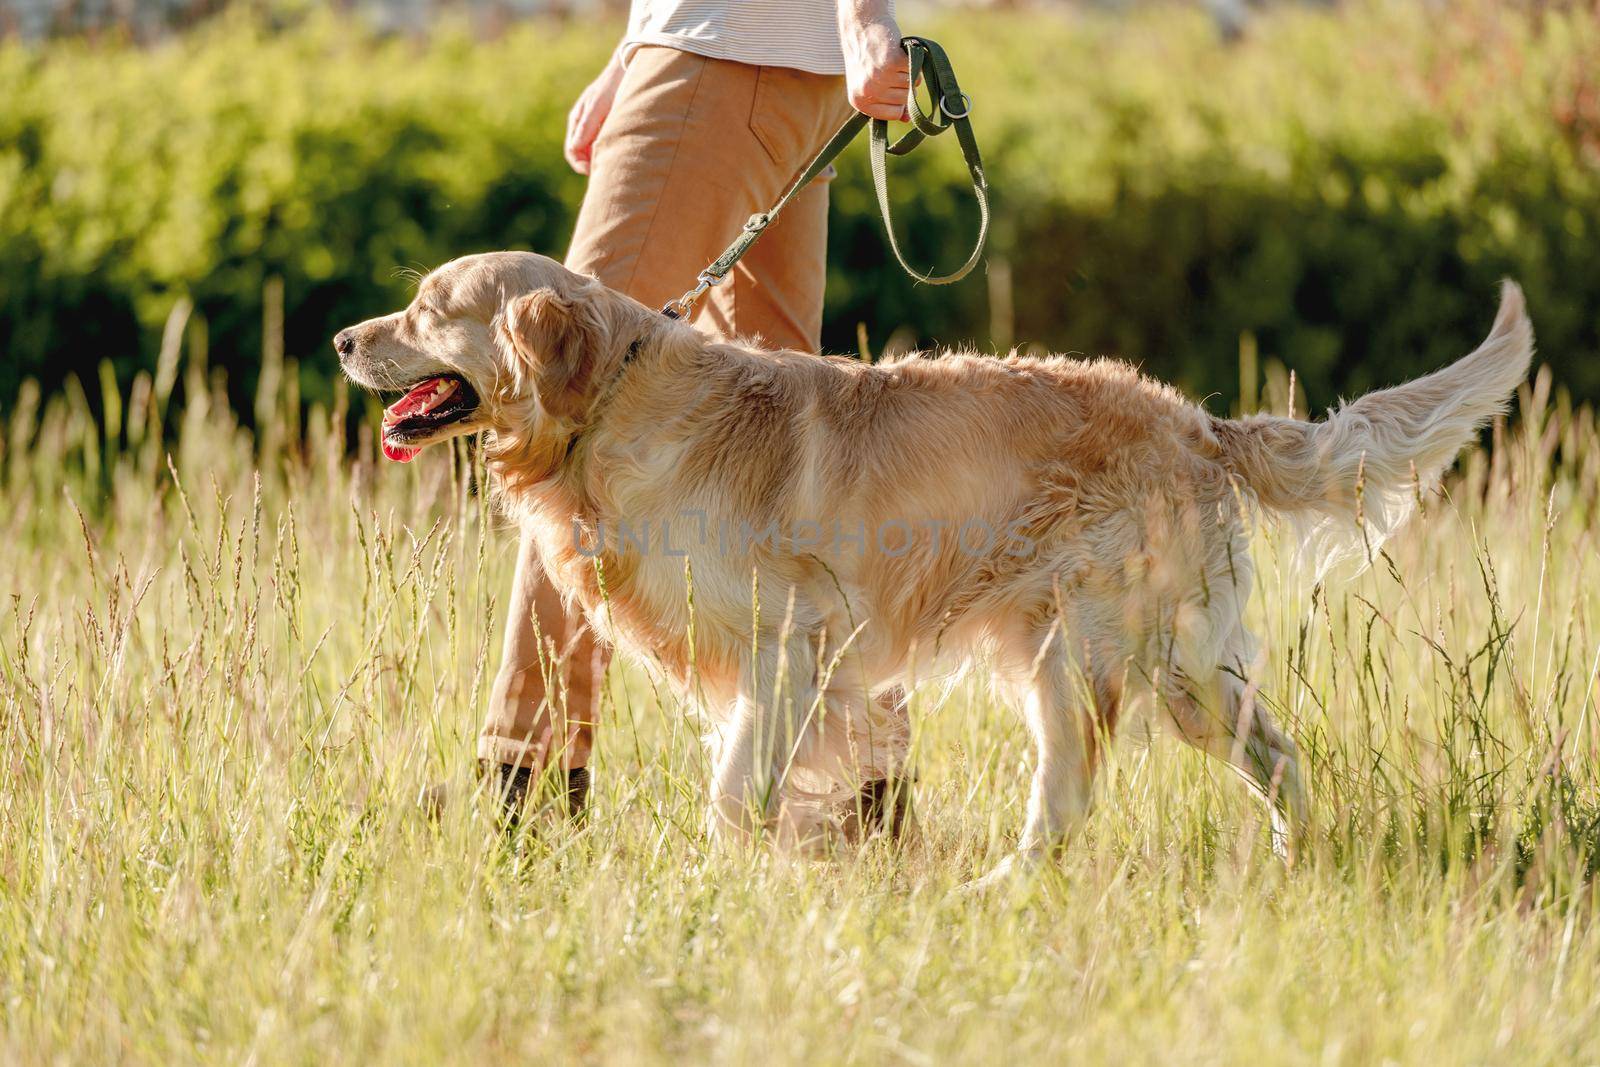 Rear view of man walking golden retriever in sunny nature